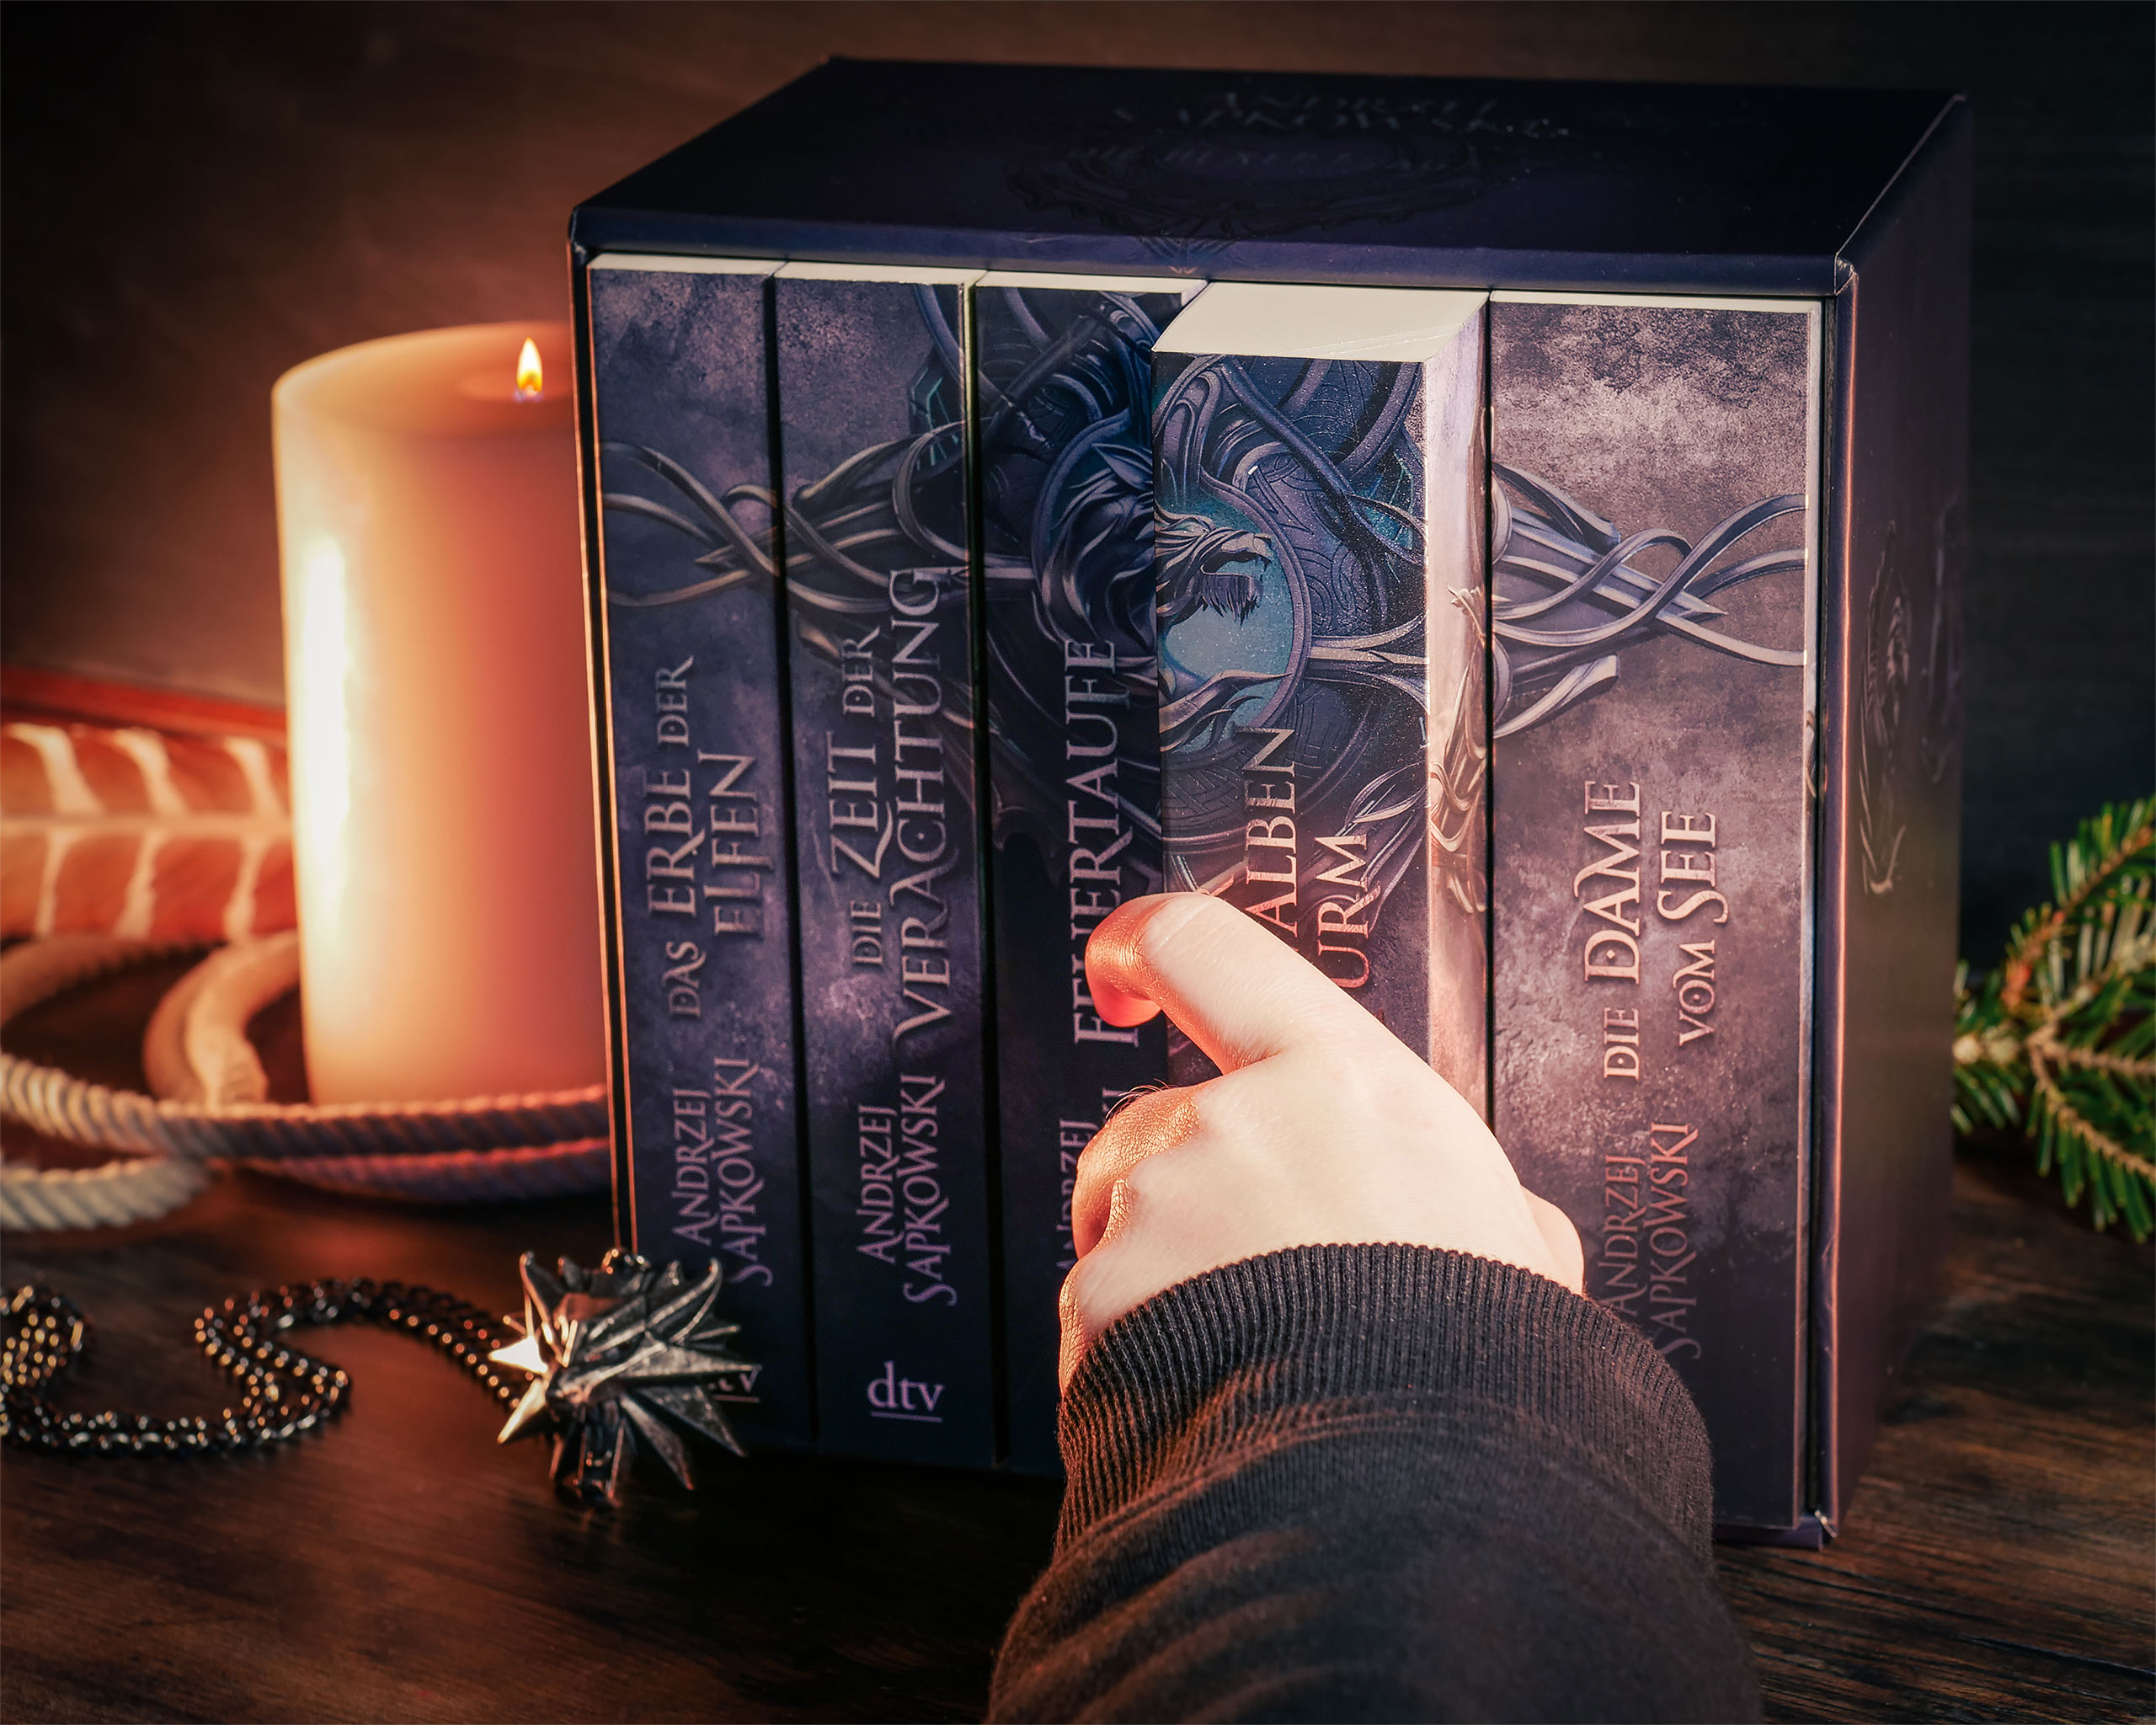 The 5 volumes of the Witcher Saga in a slipcase